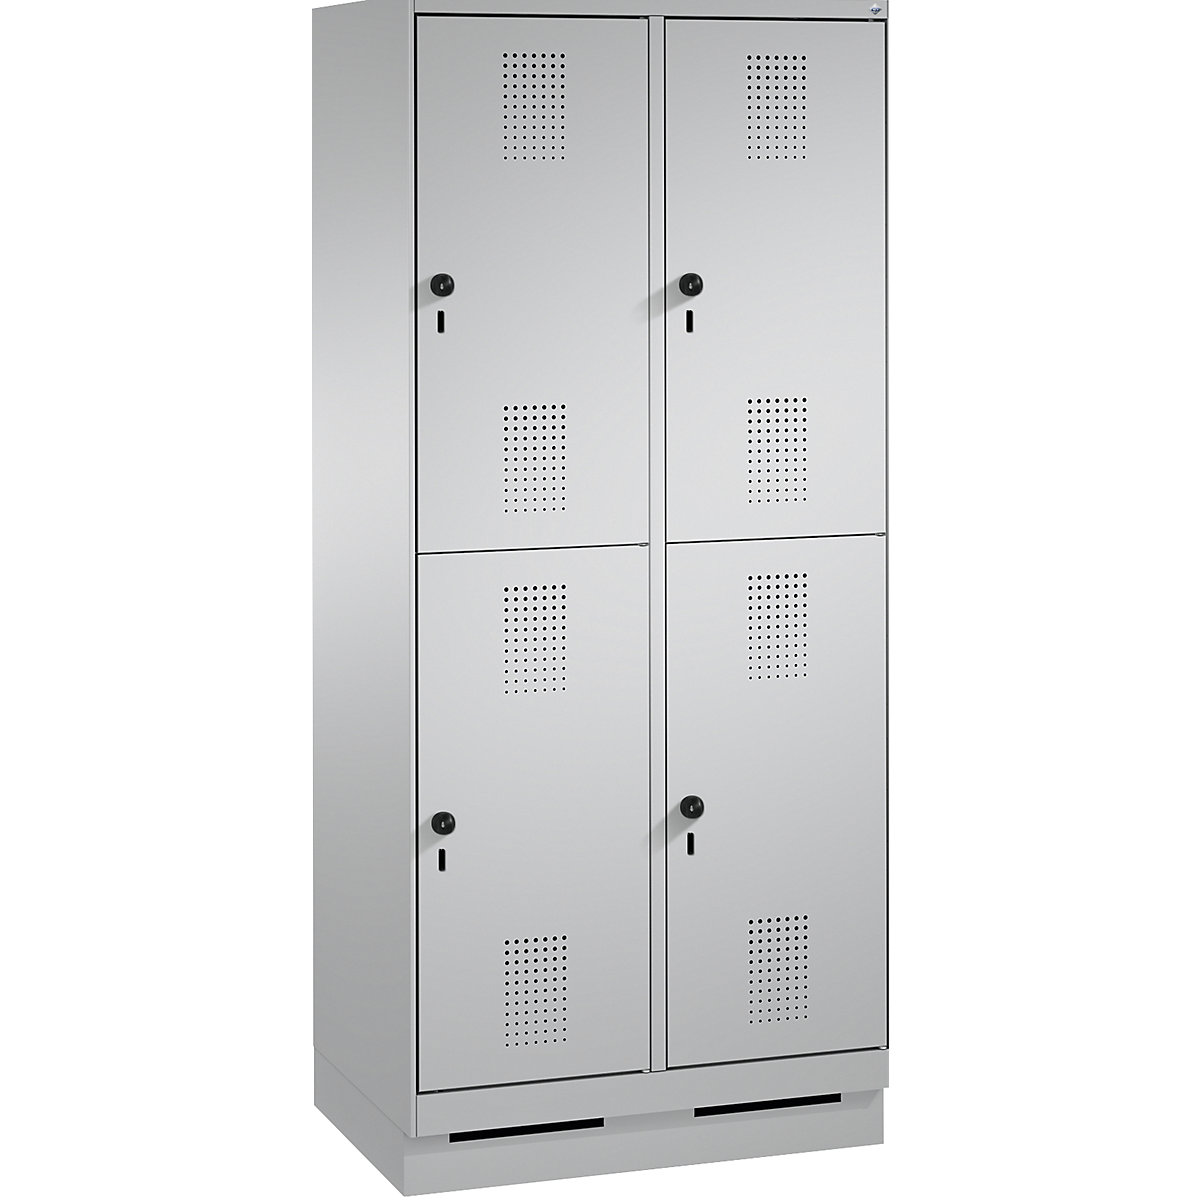 EVOLO cloakroom locker, double tier, with plinth – C+P, 2 compartments, 2 shelf compartments each, compartment width 400 mm, white aluminium / white aluminium-7